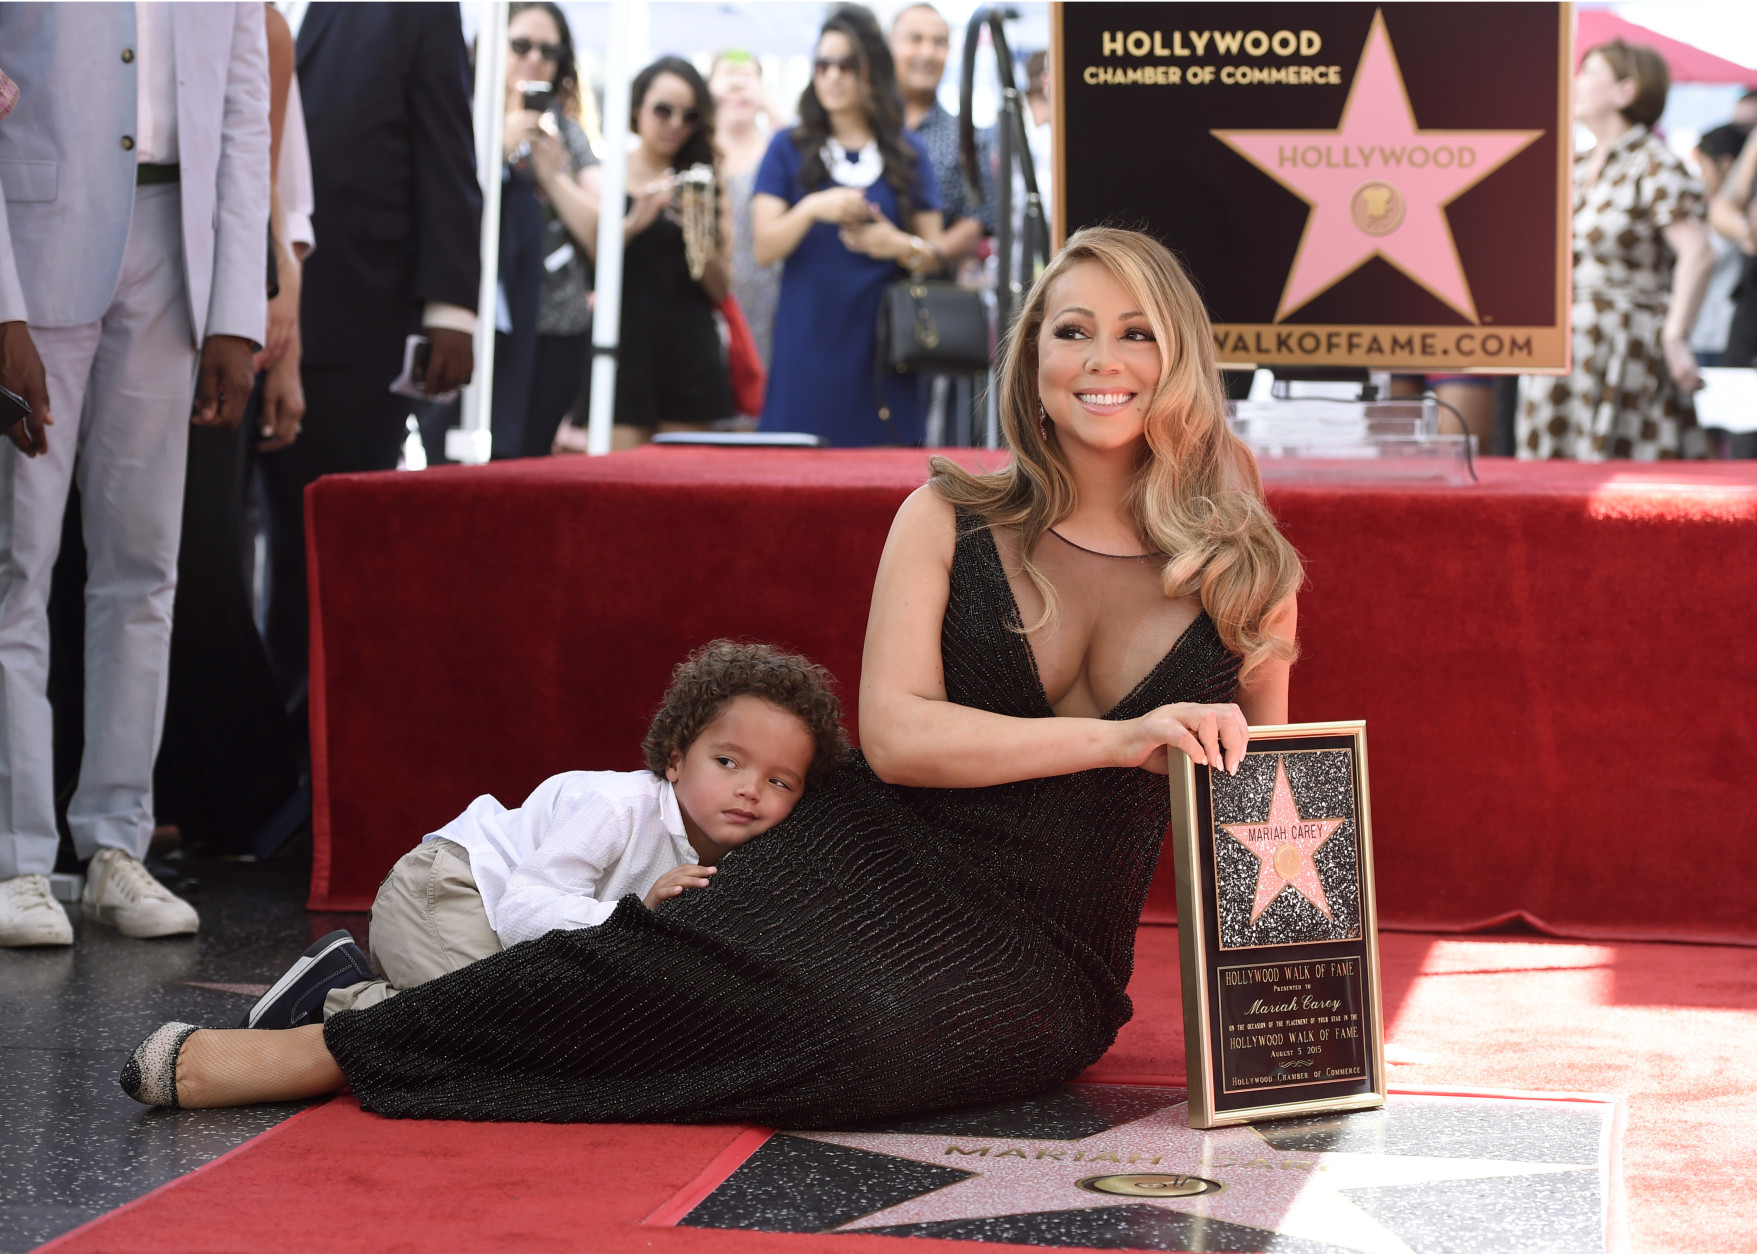 Mariah Carey, right, and her son Moroccan Cannon pose during a ceremony honoring Carey with a star on the Hollywood Walk of Fame on Wednesday, Aug. 5, 2015 in Los Angeles.  (Photo by Chris Pizzello/Invision/AP)